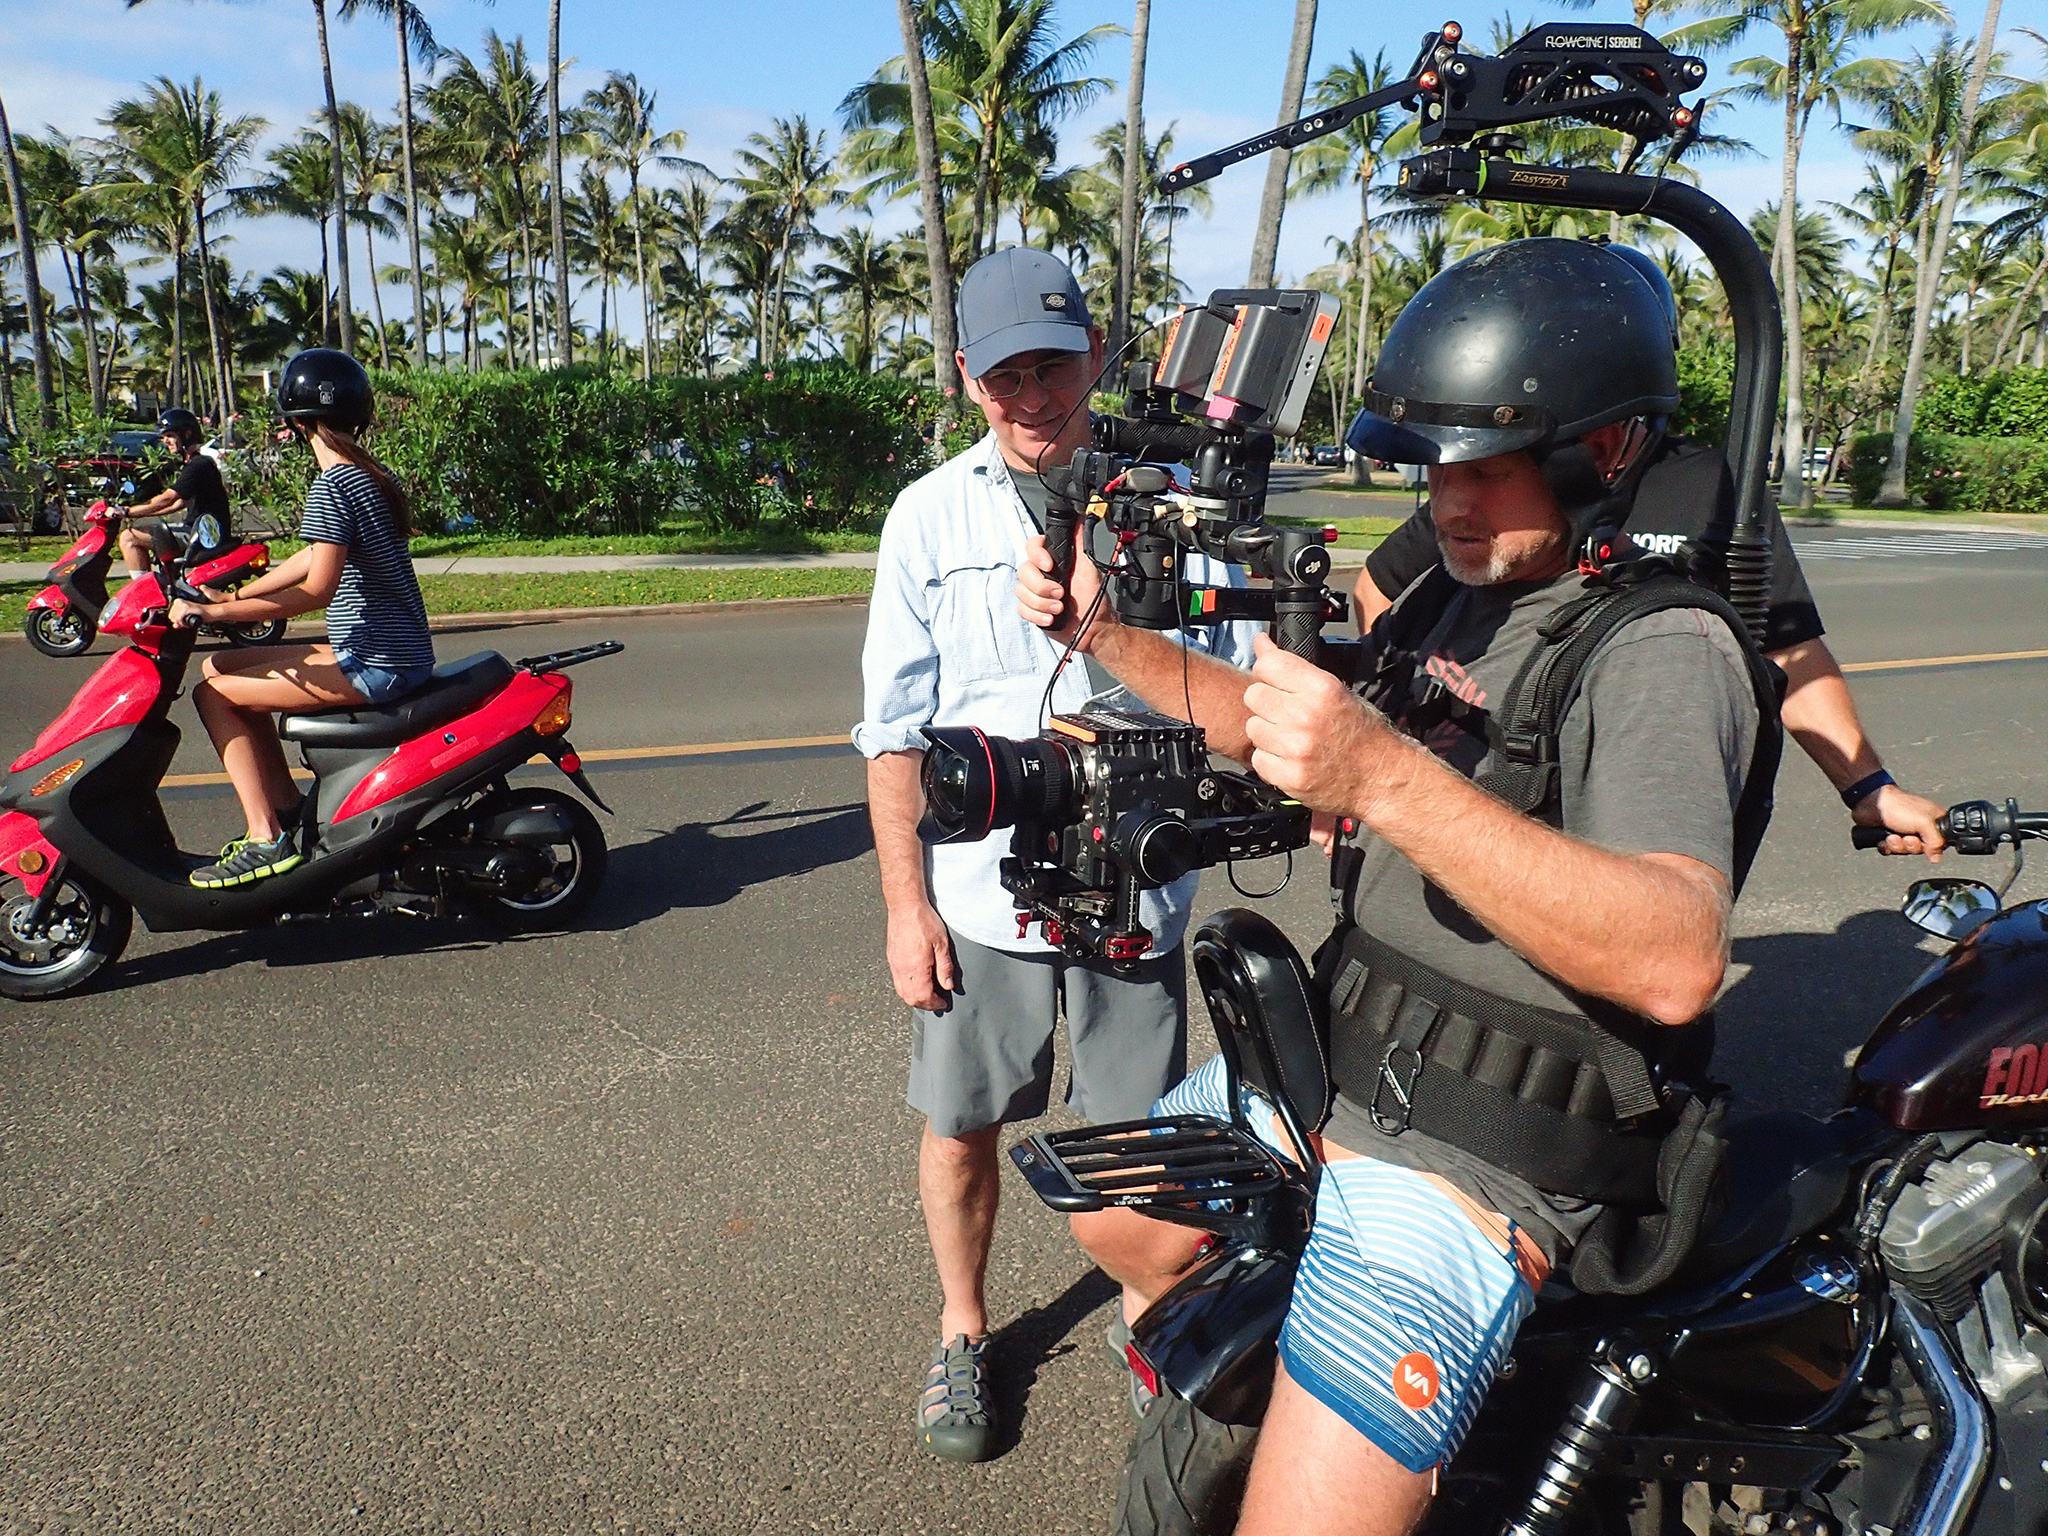  Behind the scenes photo for Turtle Bay Resort highlighting the various activities available through the resort 